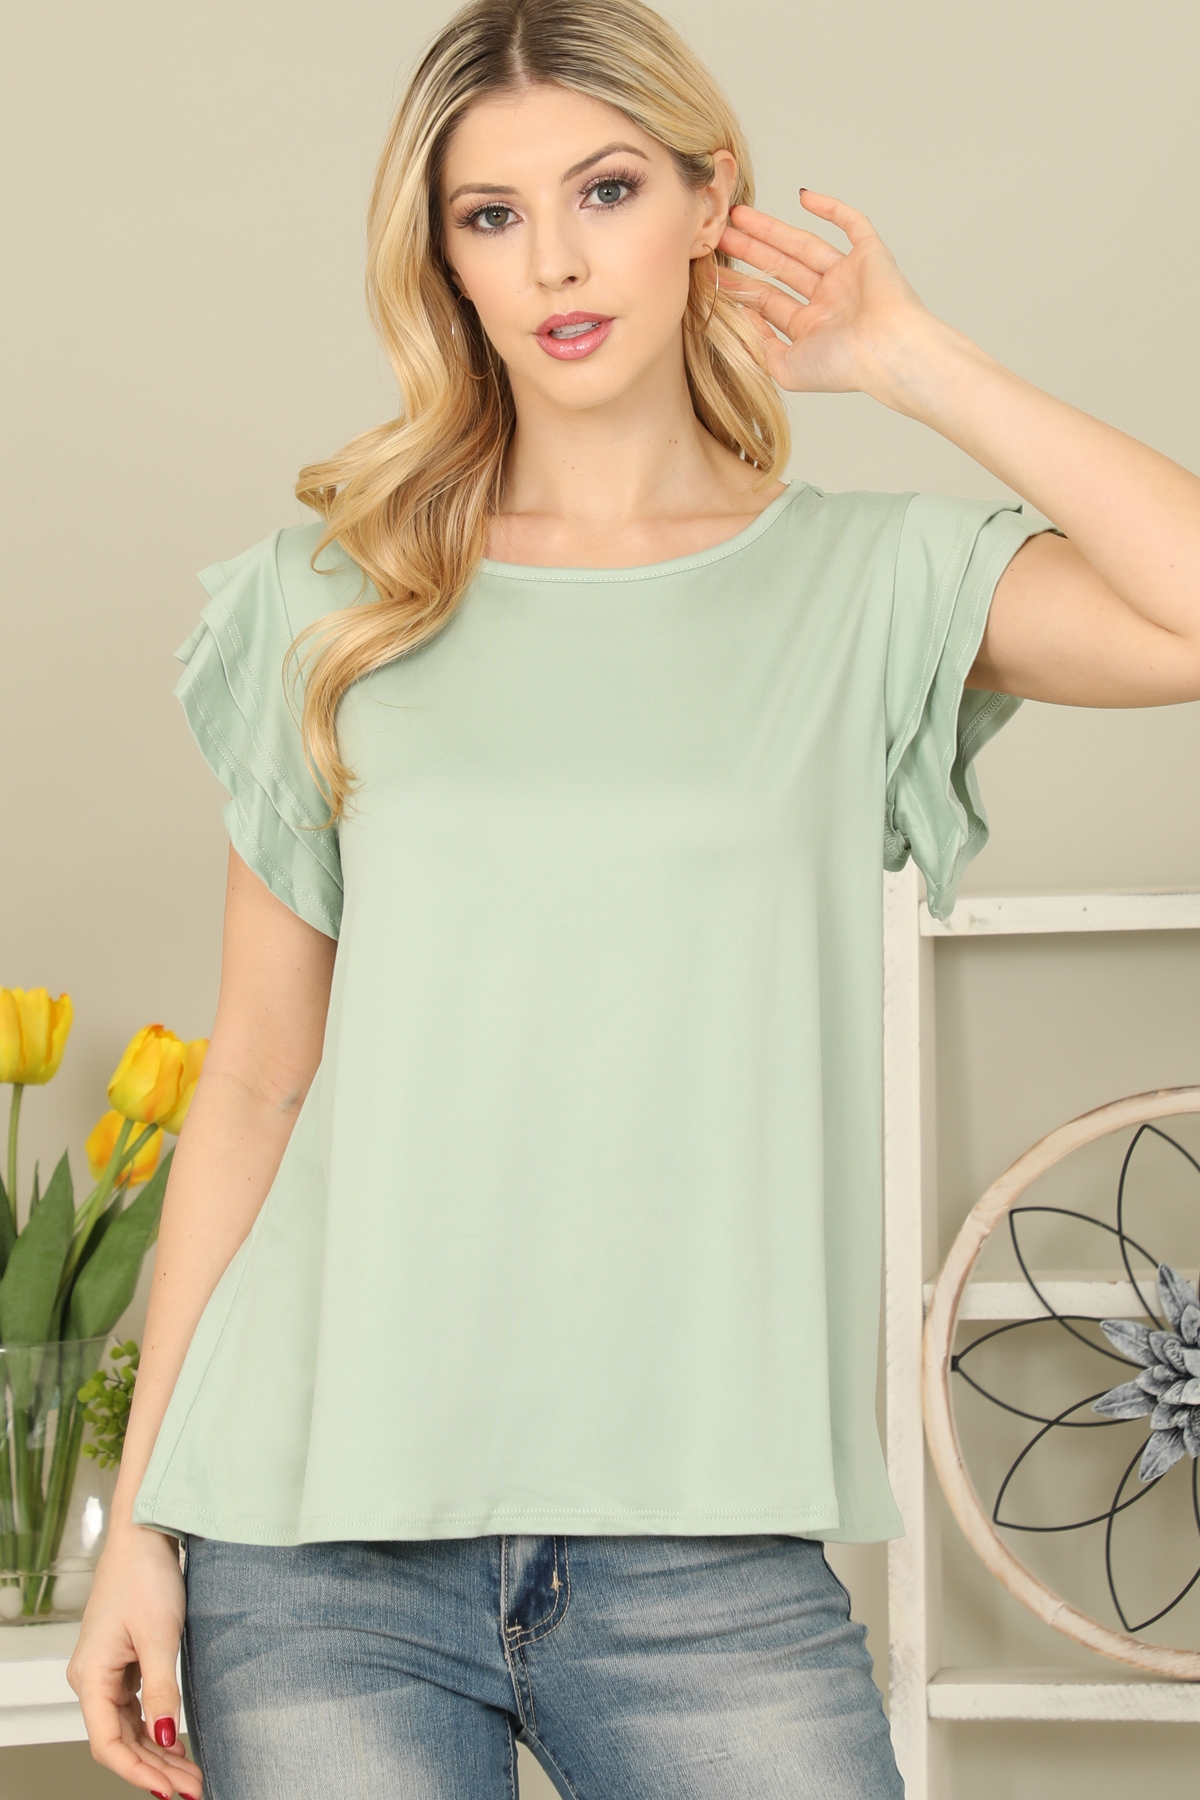 S11-14-2-YMT20046-NSG - LAYERED RUFFLE SHORT SLEEVE SOLID TOP- NEW SAGE 1-2-2-2